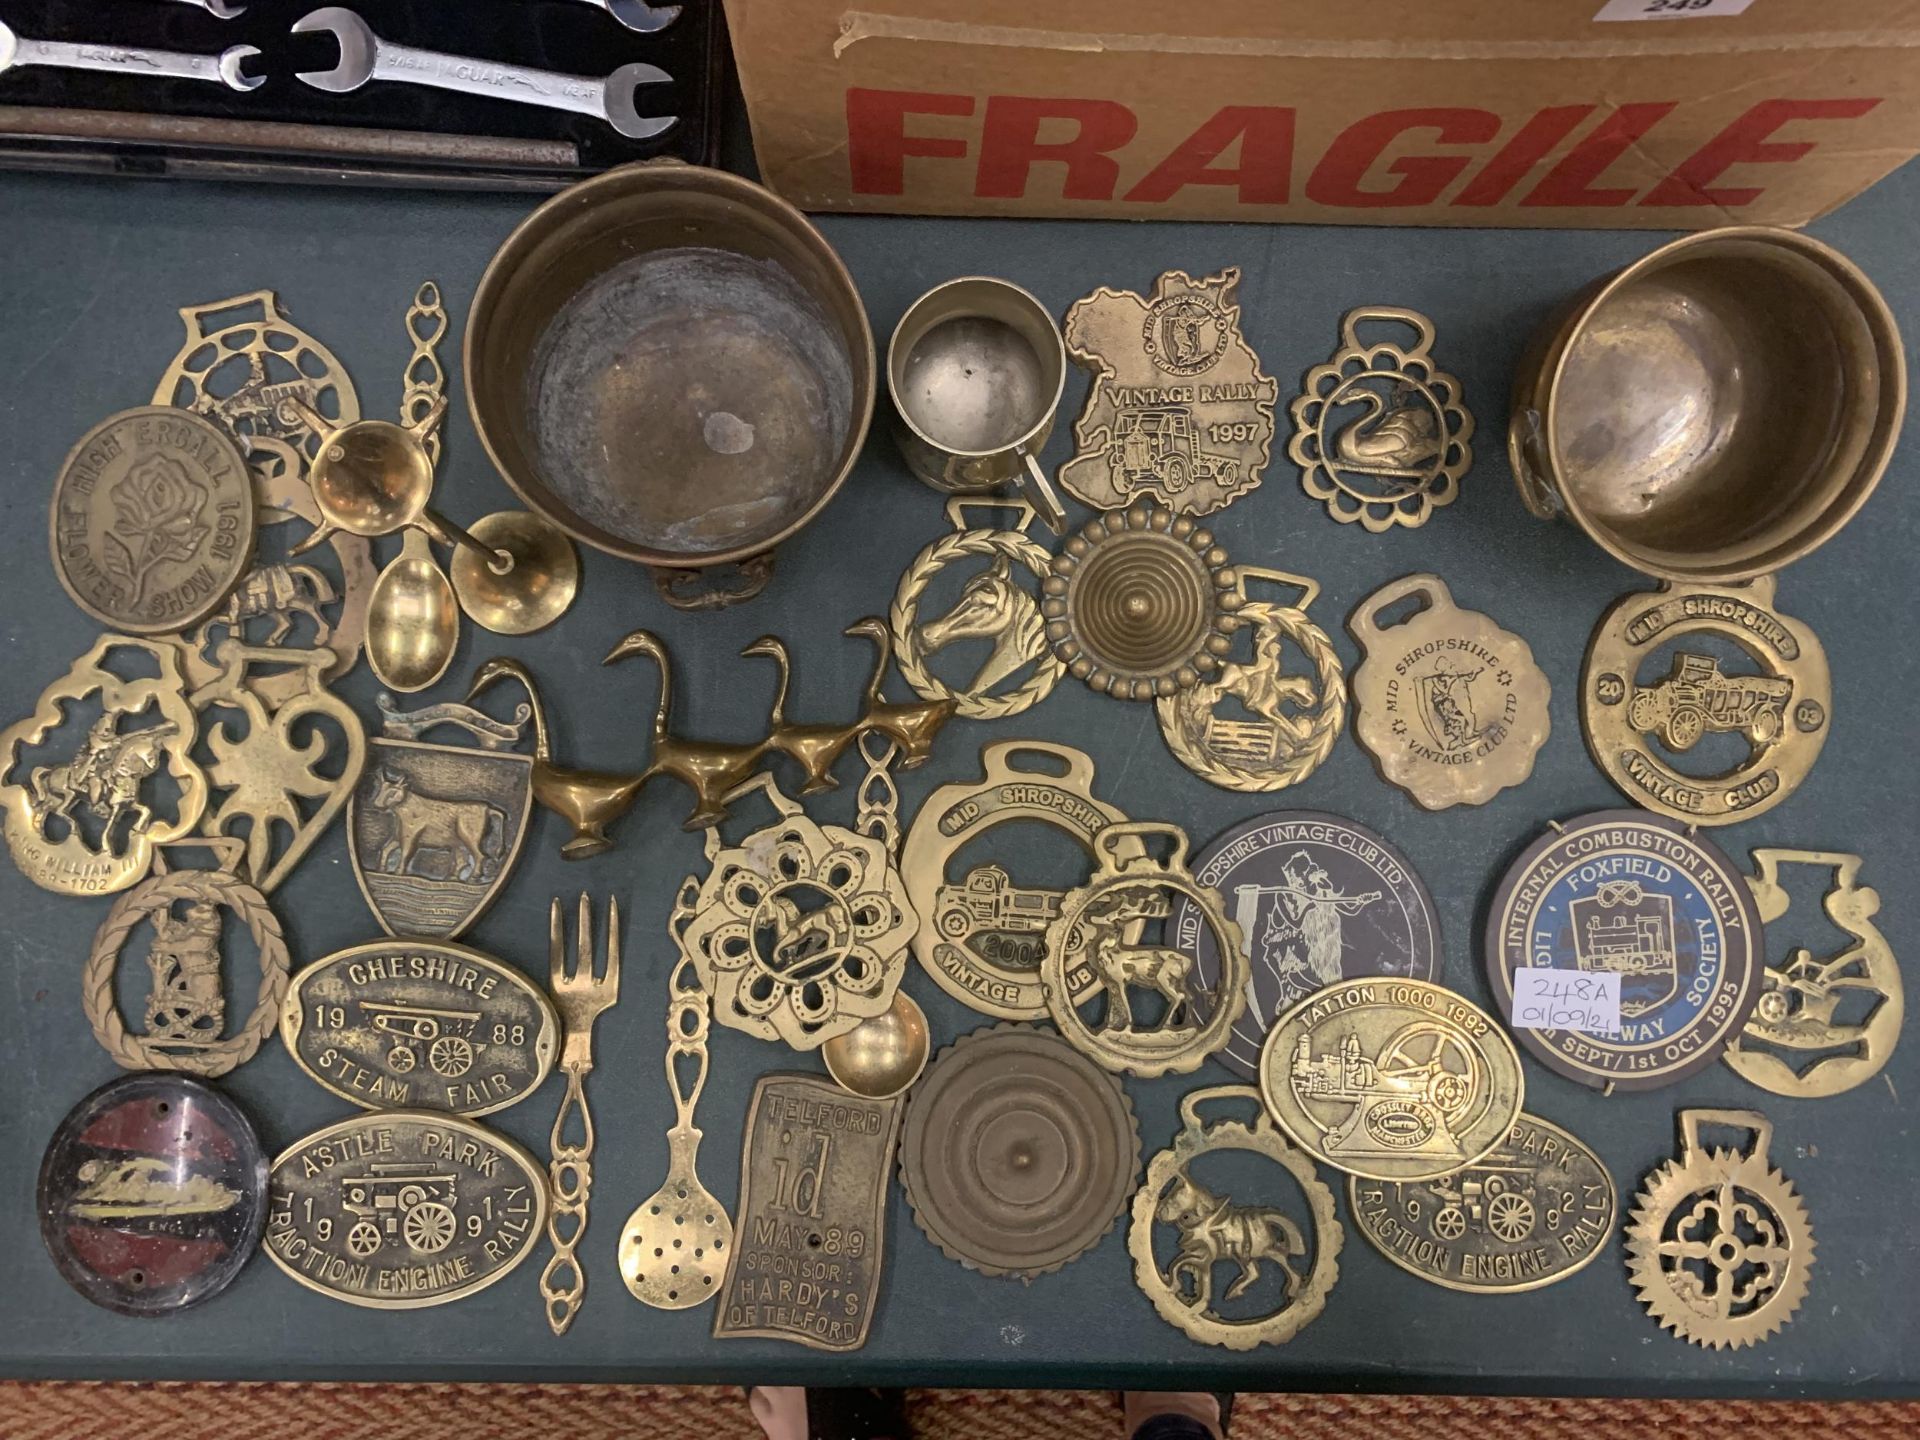 A ALRGE COLLECTION OF BRASS ITEMS TO INCLUDE HORSE BRASSES, STEAM FAIR BADGES, DISHES ETC